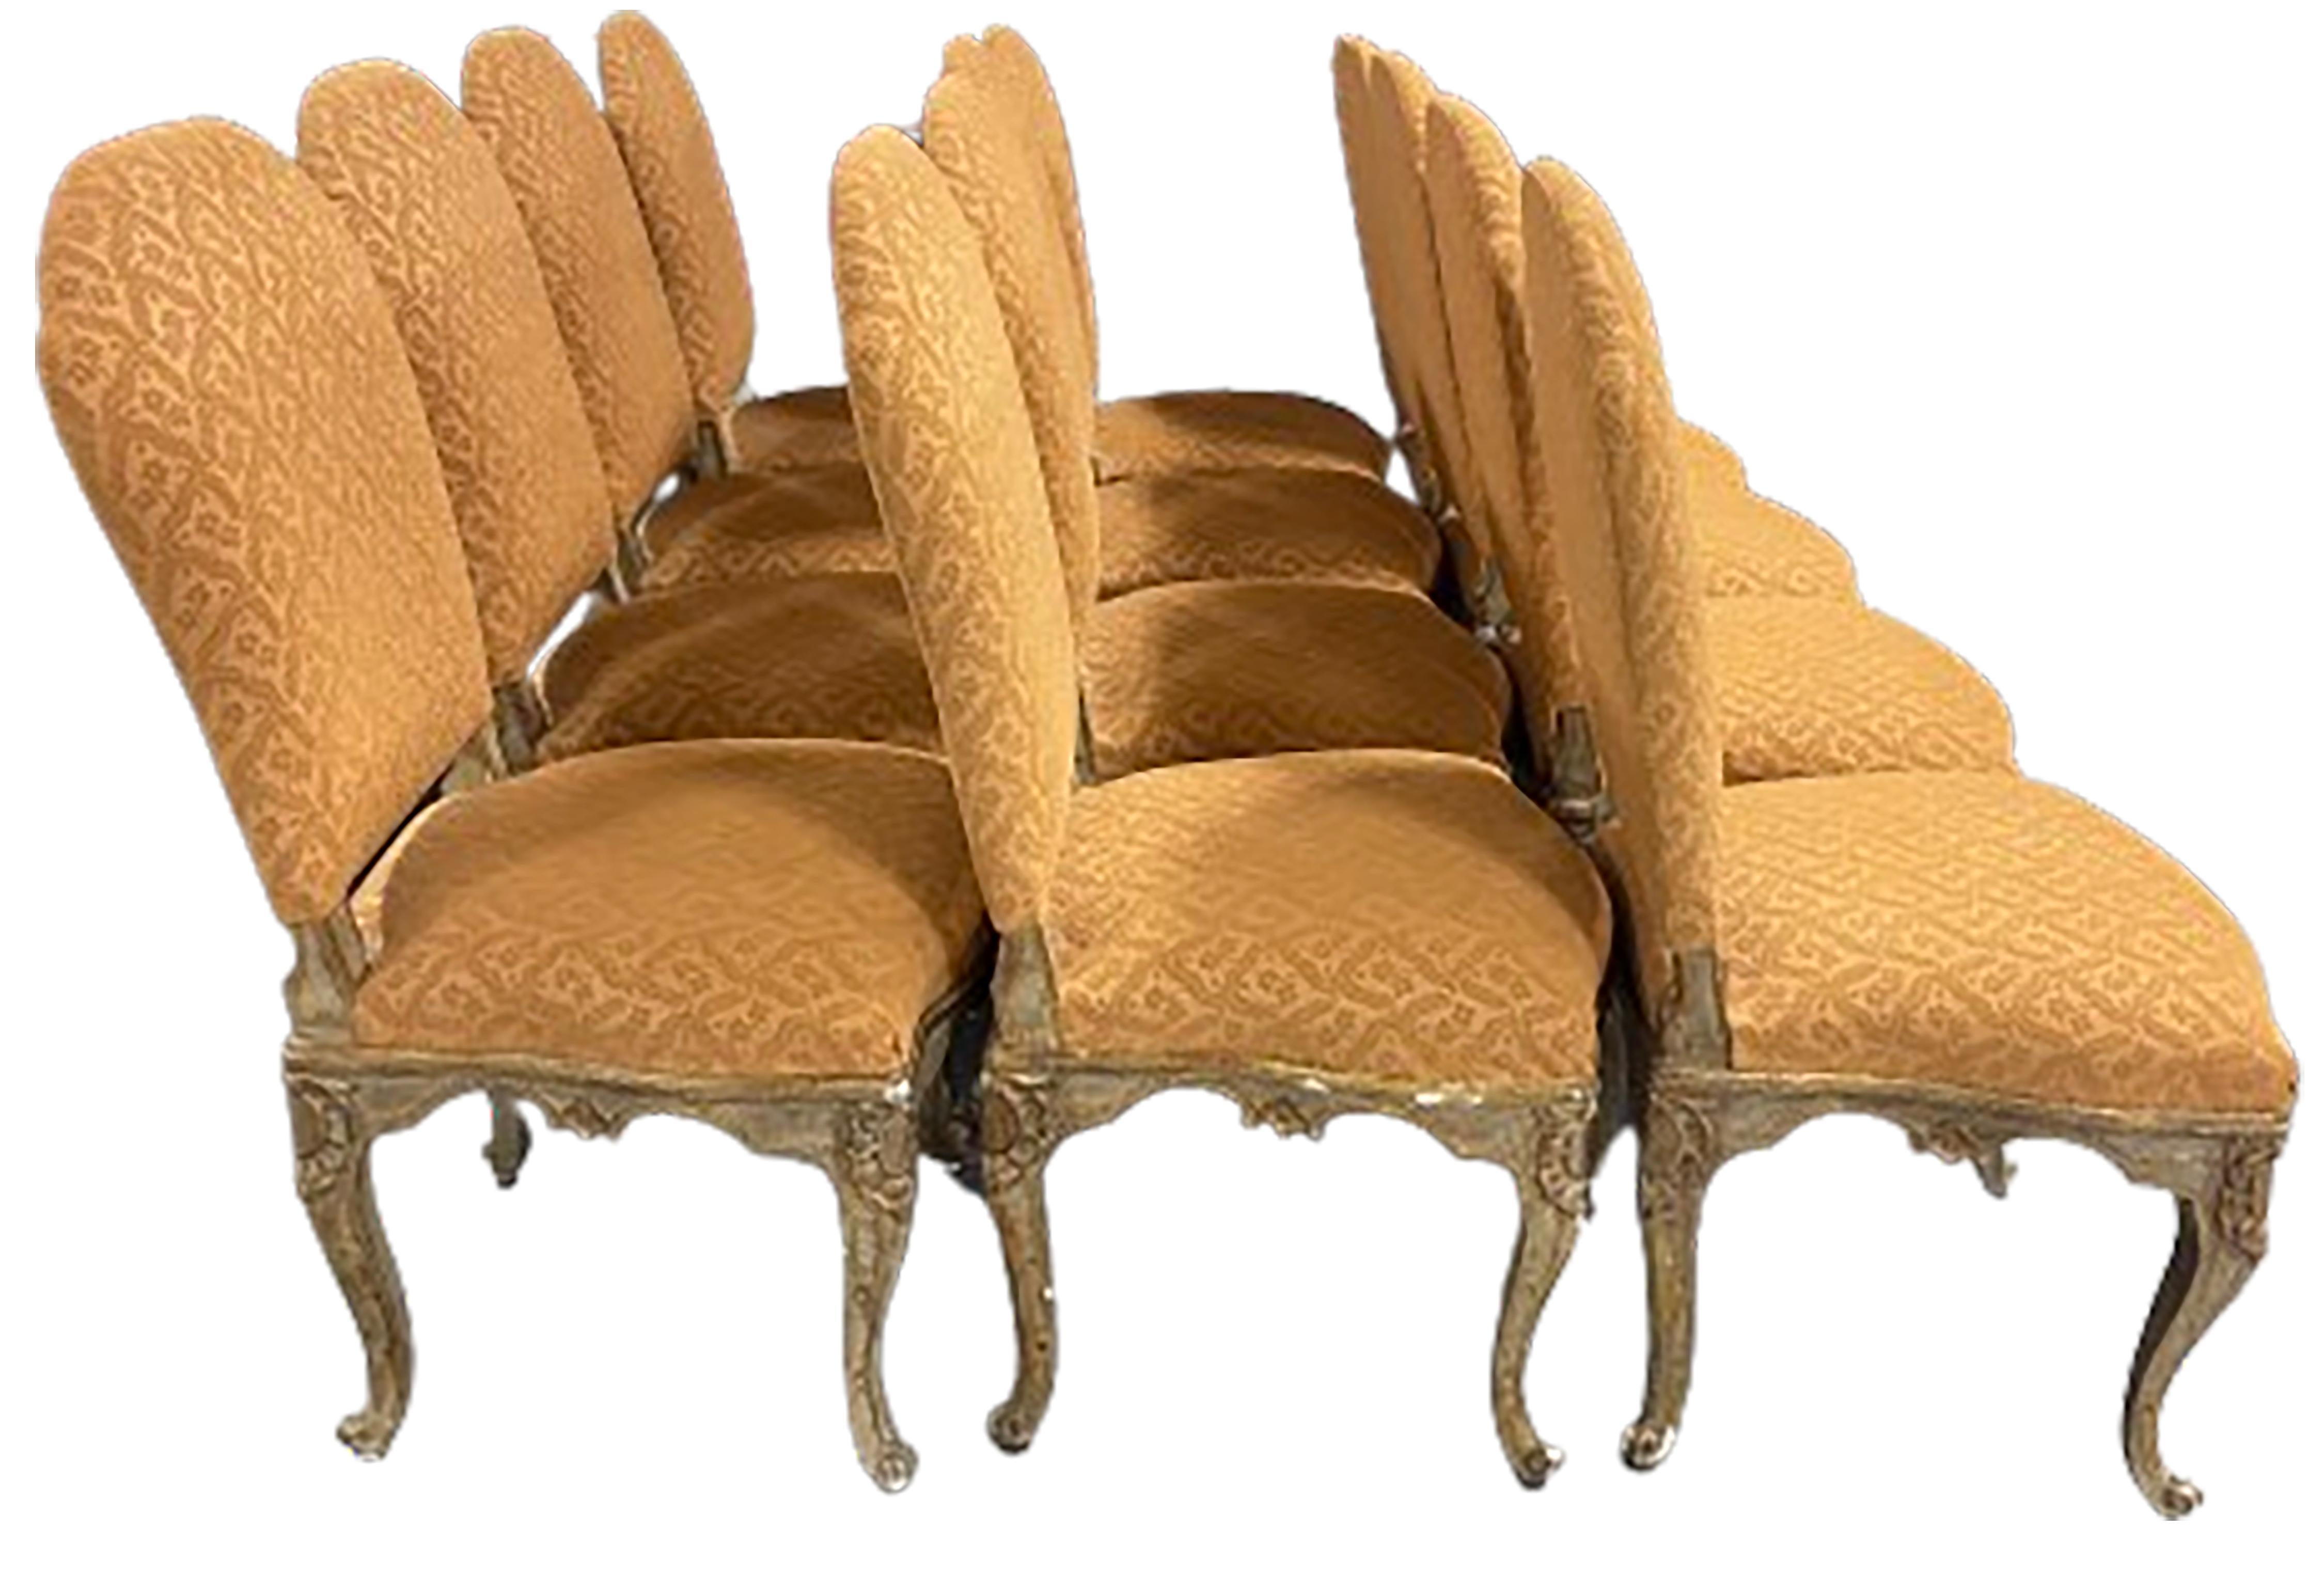 An elegant set of twelve Louis XV style dining chairs. Mustard gold colored upholstered fabric with cabriole wooden legs. Slightly angled backs and a  dark gilded base. 

In good condition. Wear consistent with age and use.

No obvious markings on